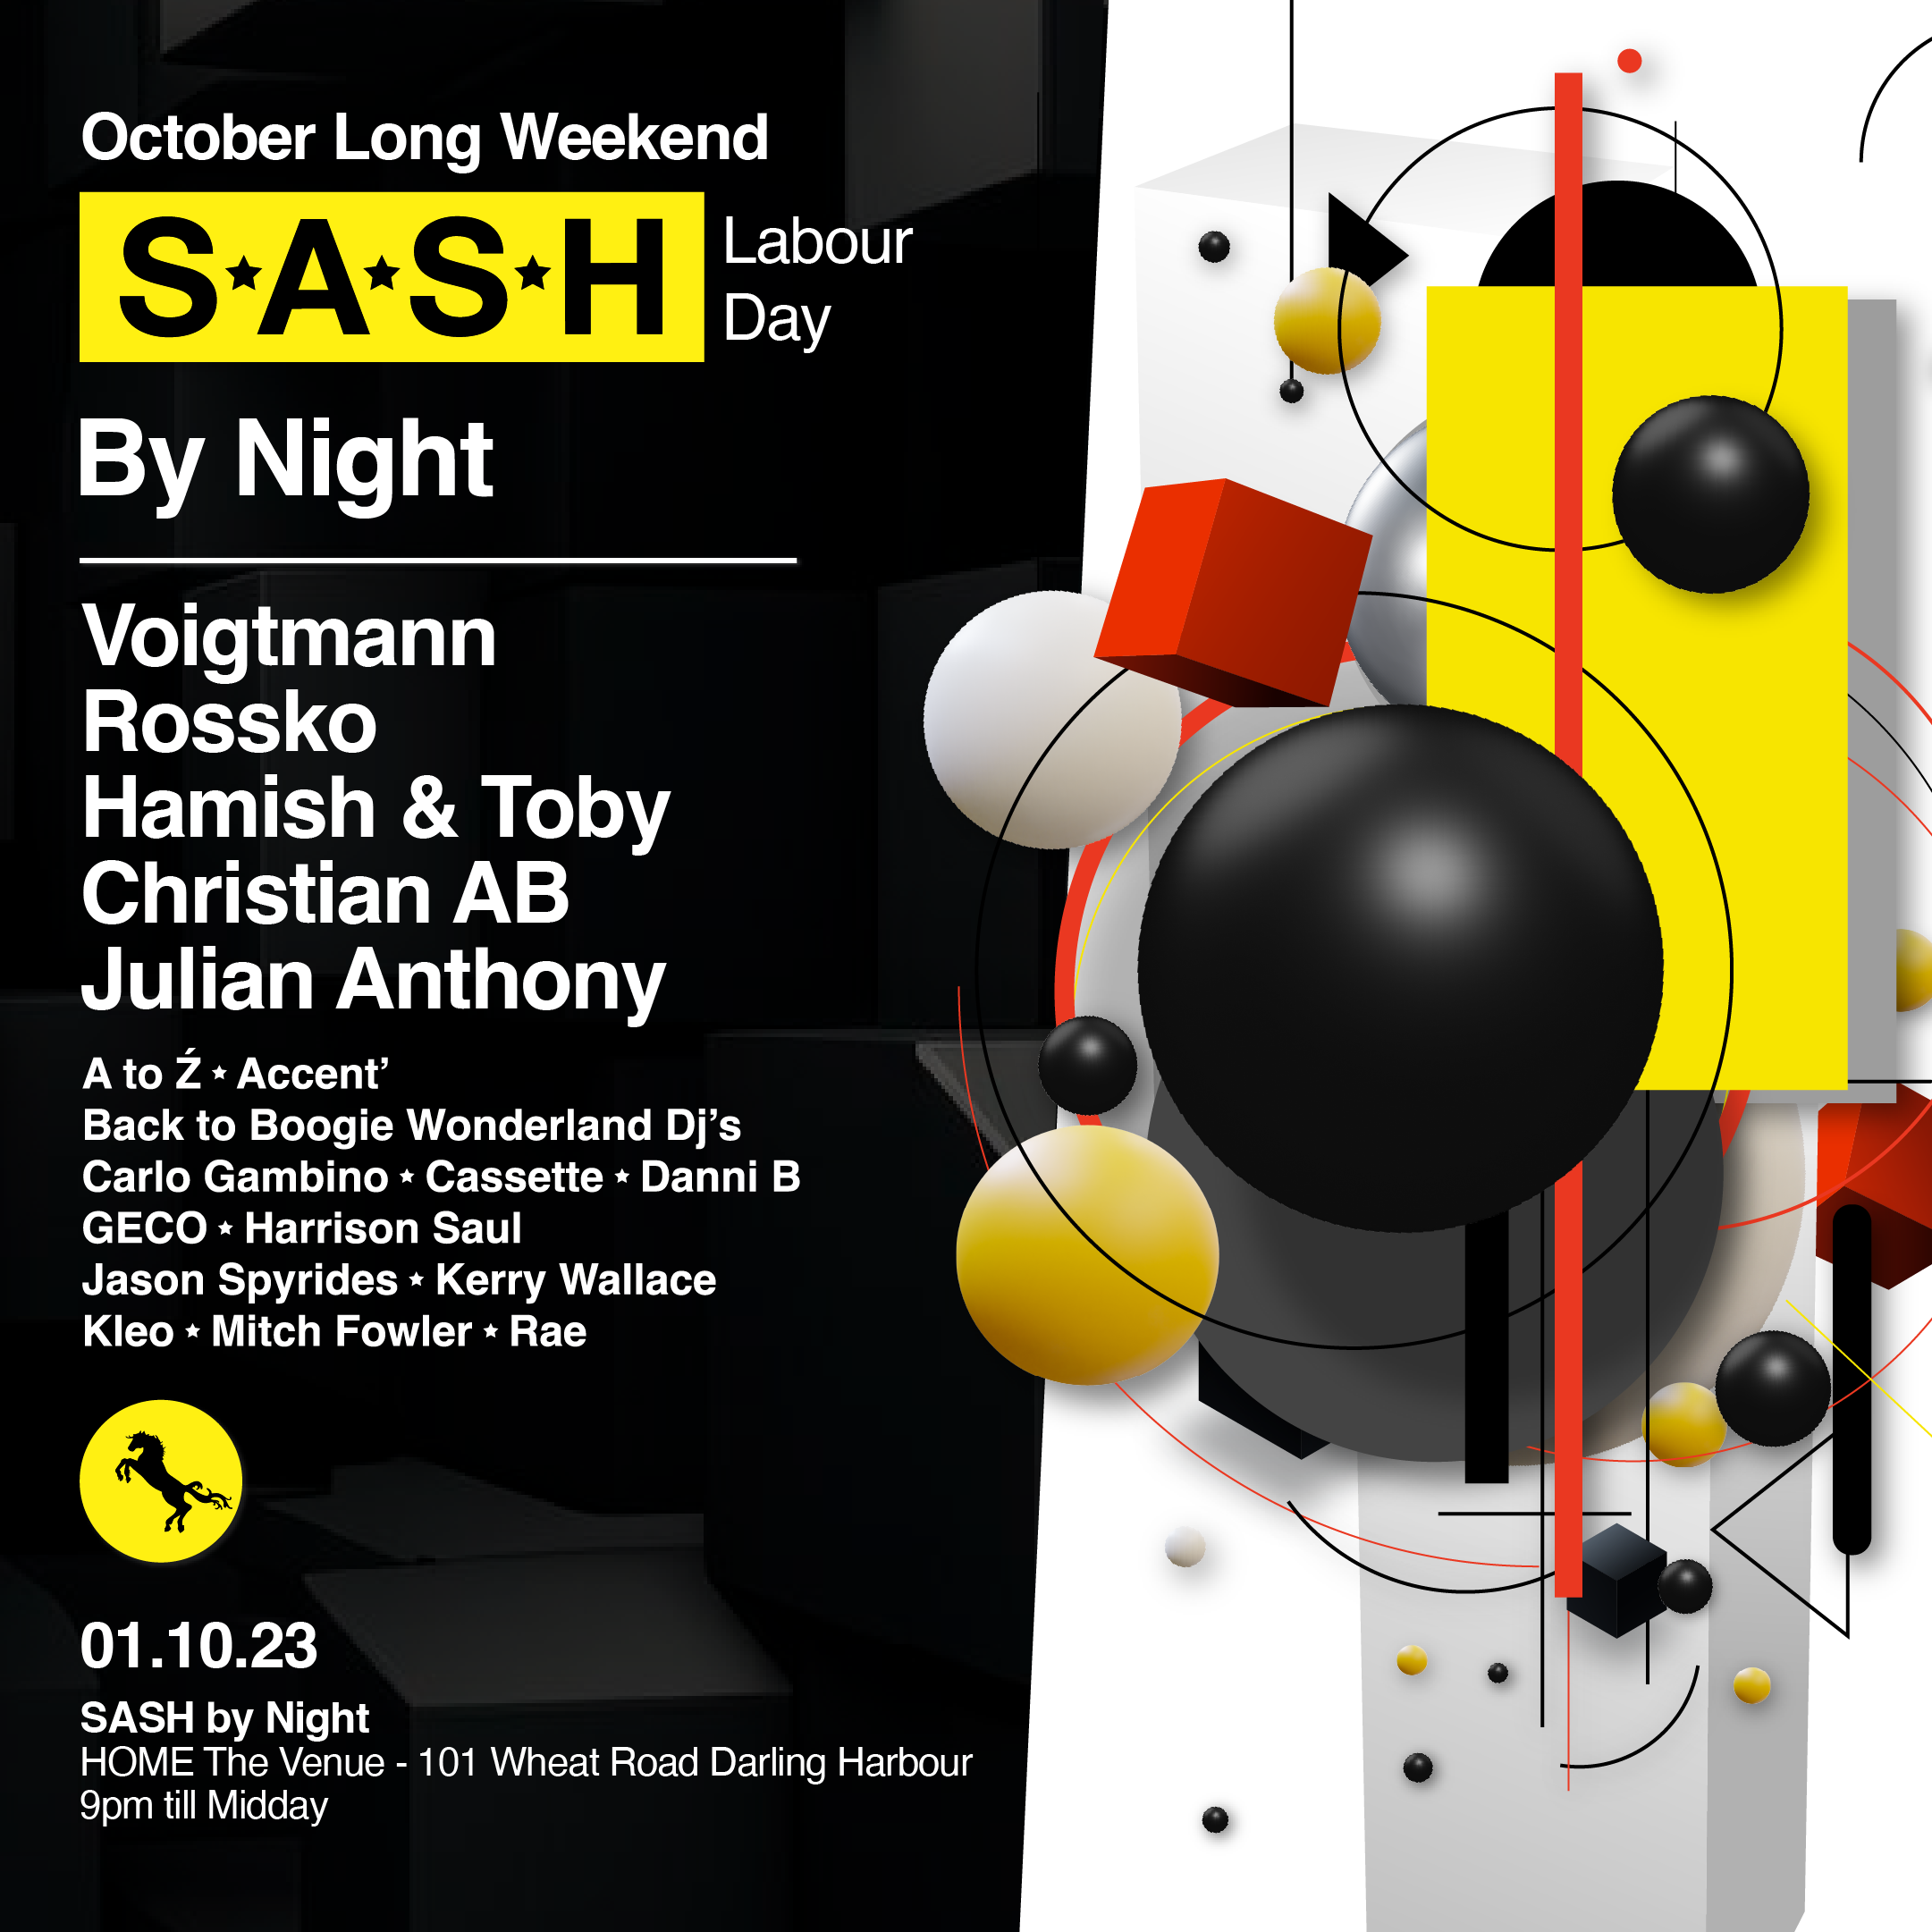 ★ S.A.S.H By Night ★ October Long Weekend ★ 1st October ★ - Página frontal